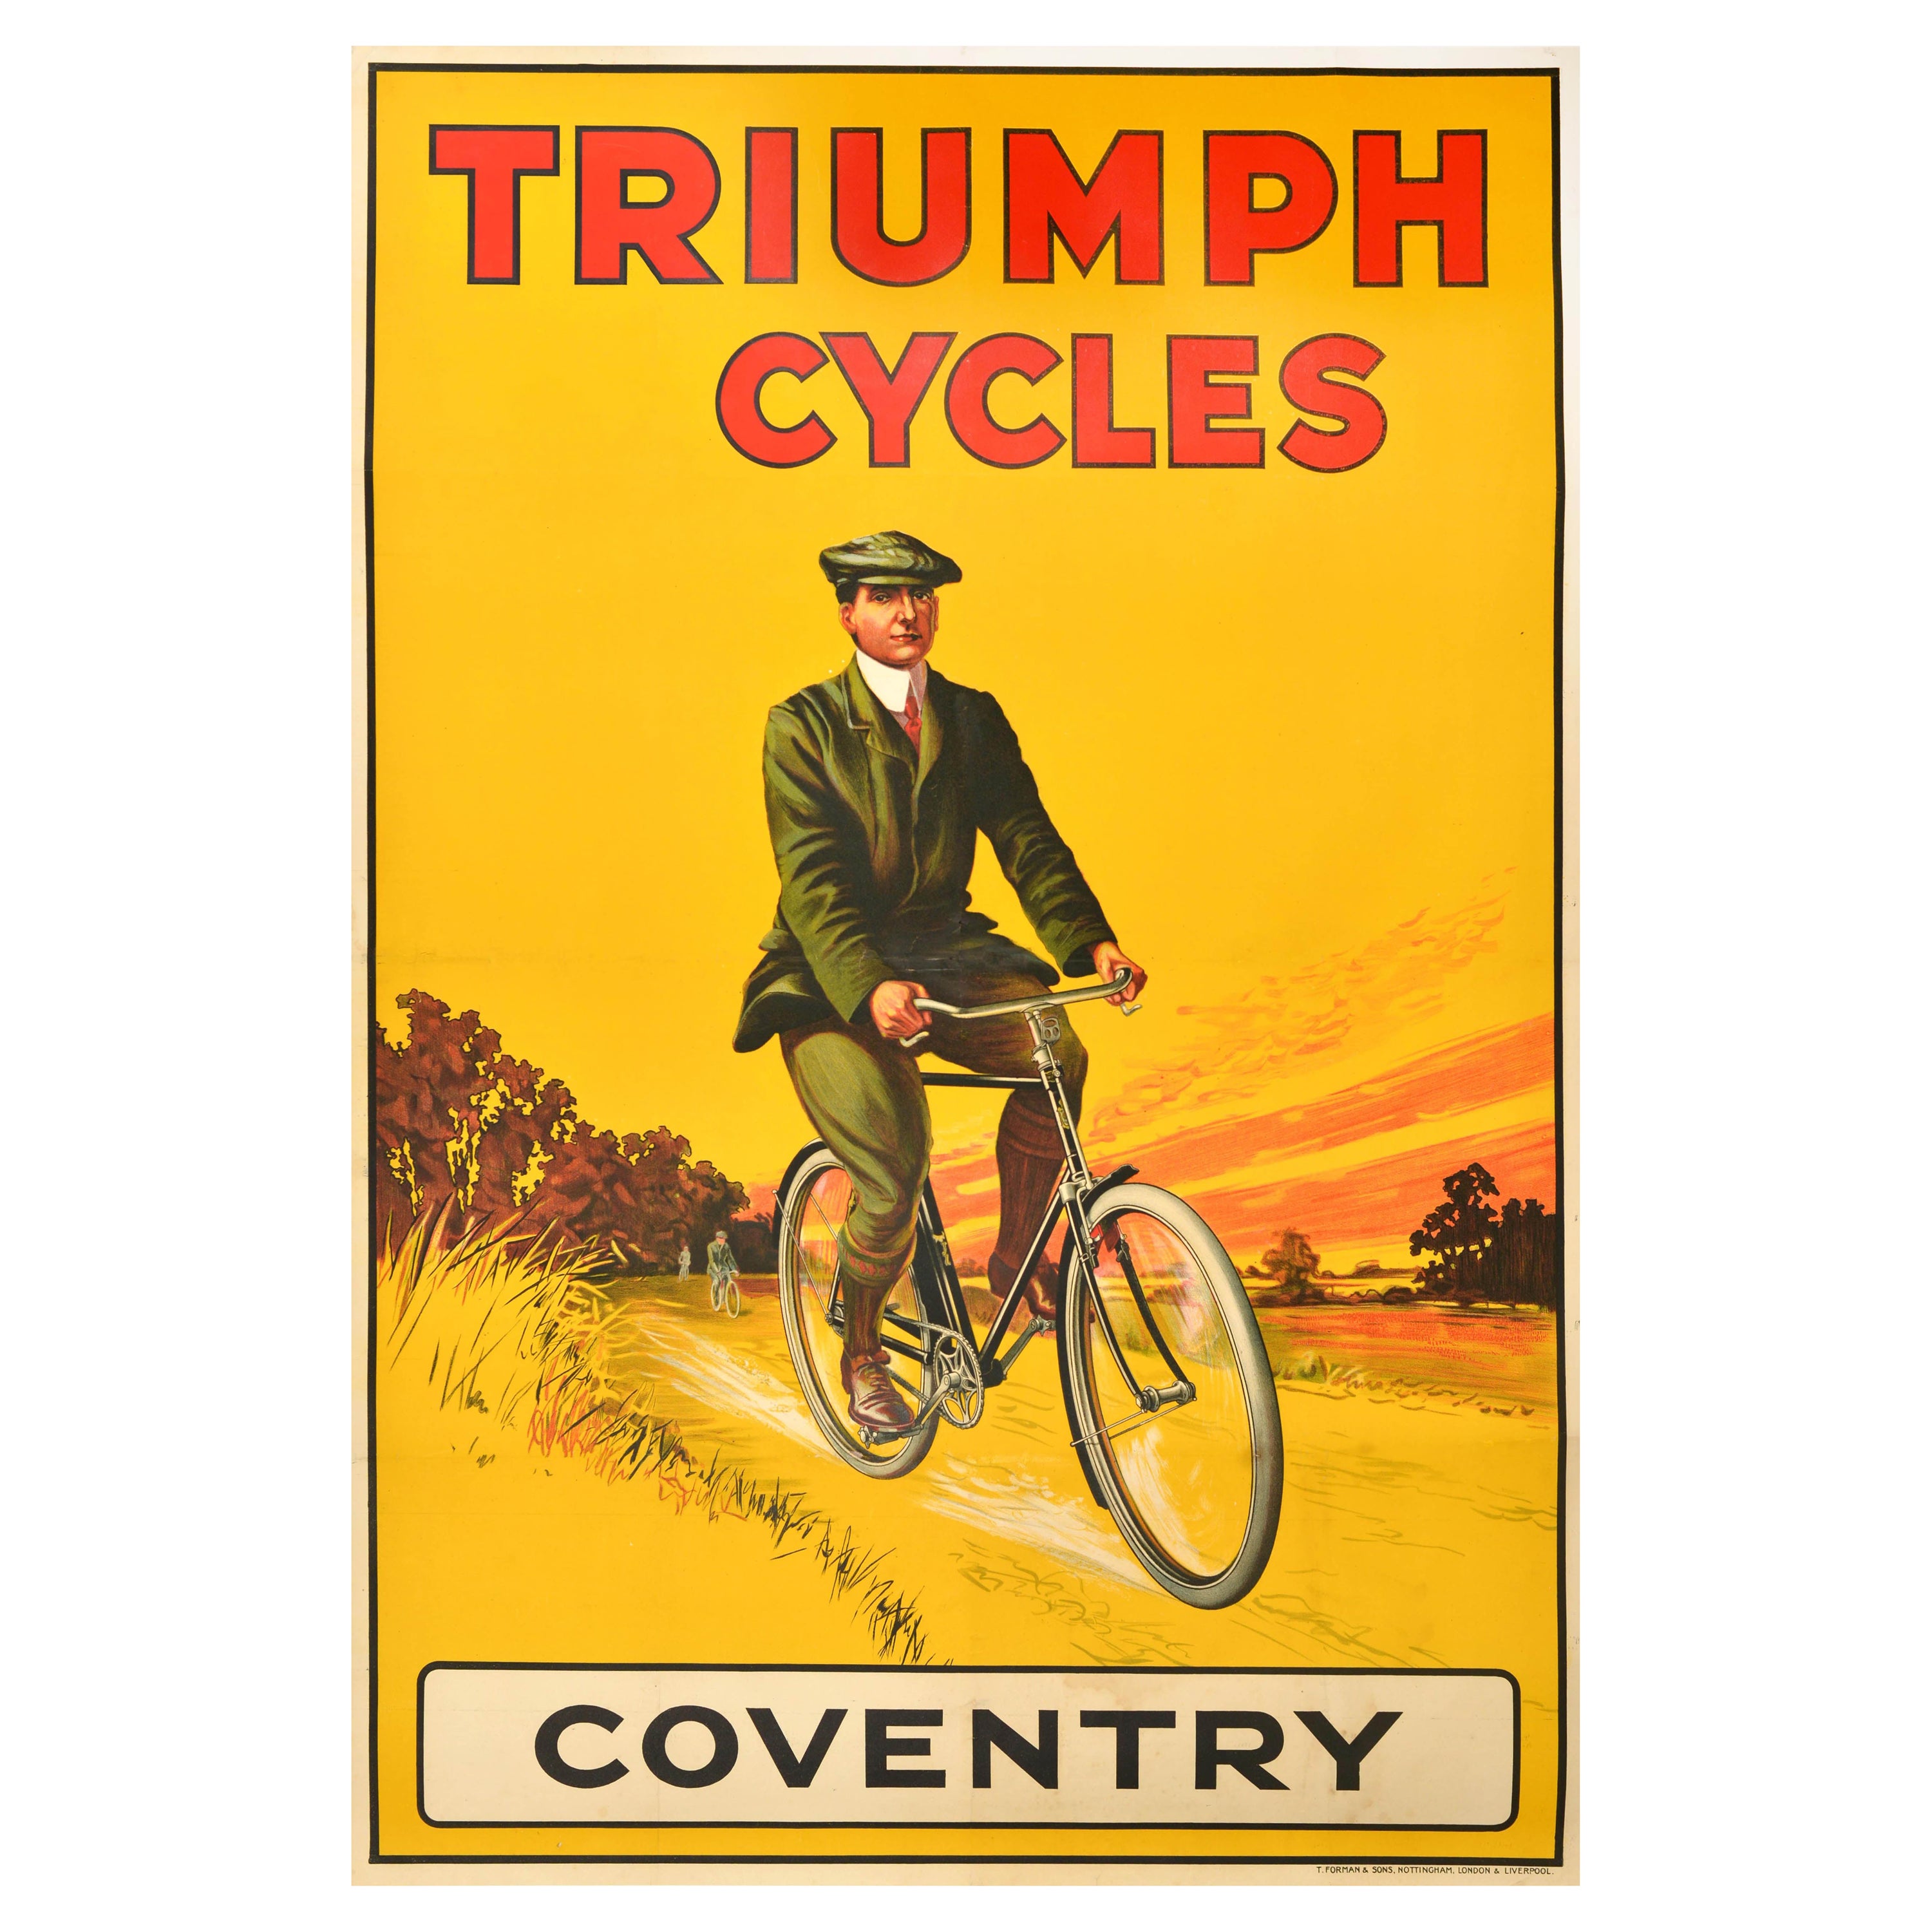 Original Antique Advertising Poster Triumph Cycles Coventry Bicycle Art Design For Sale